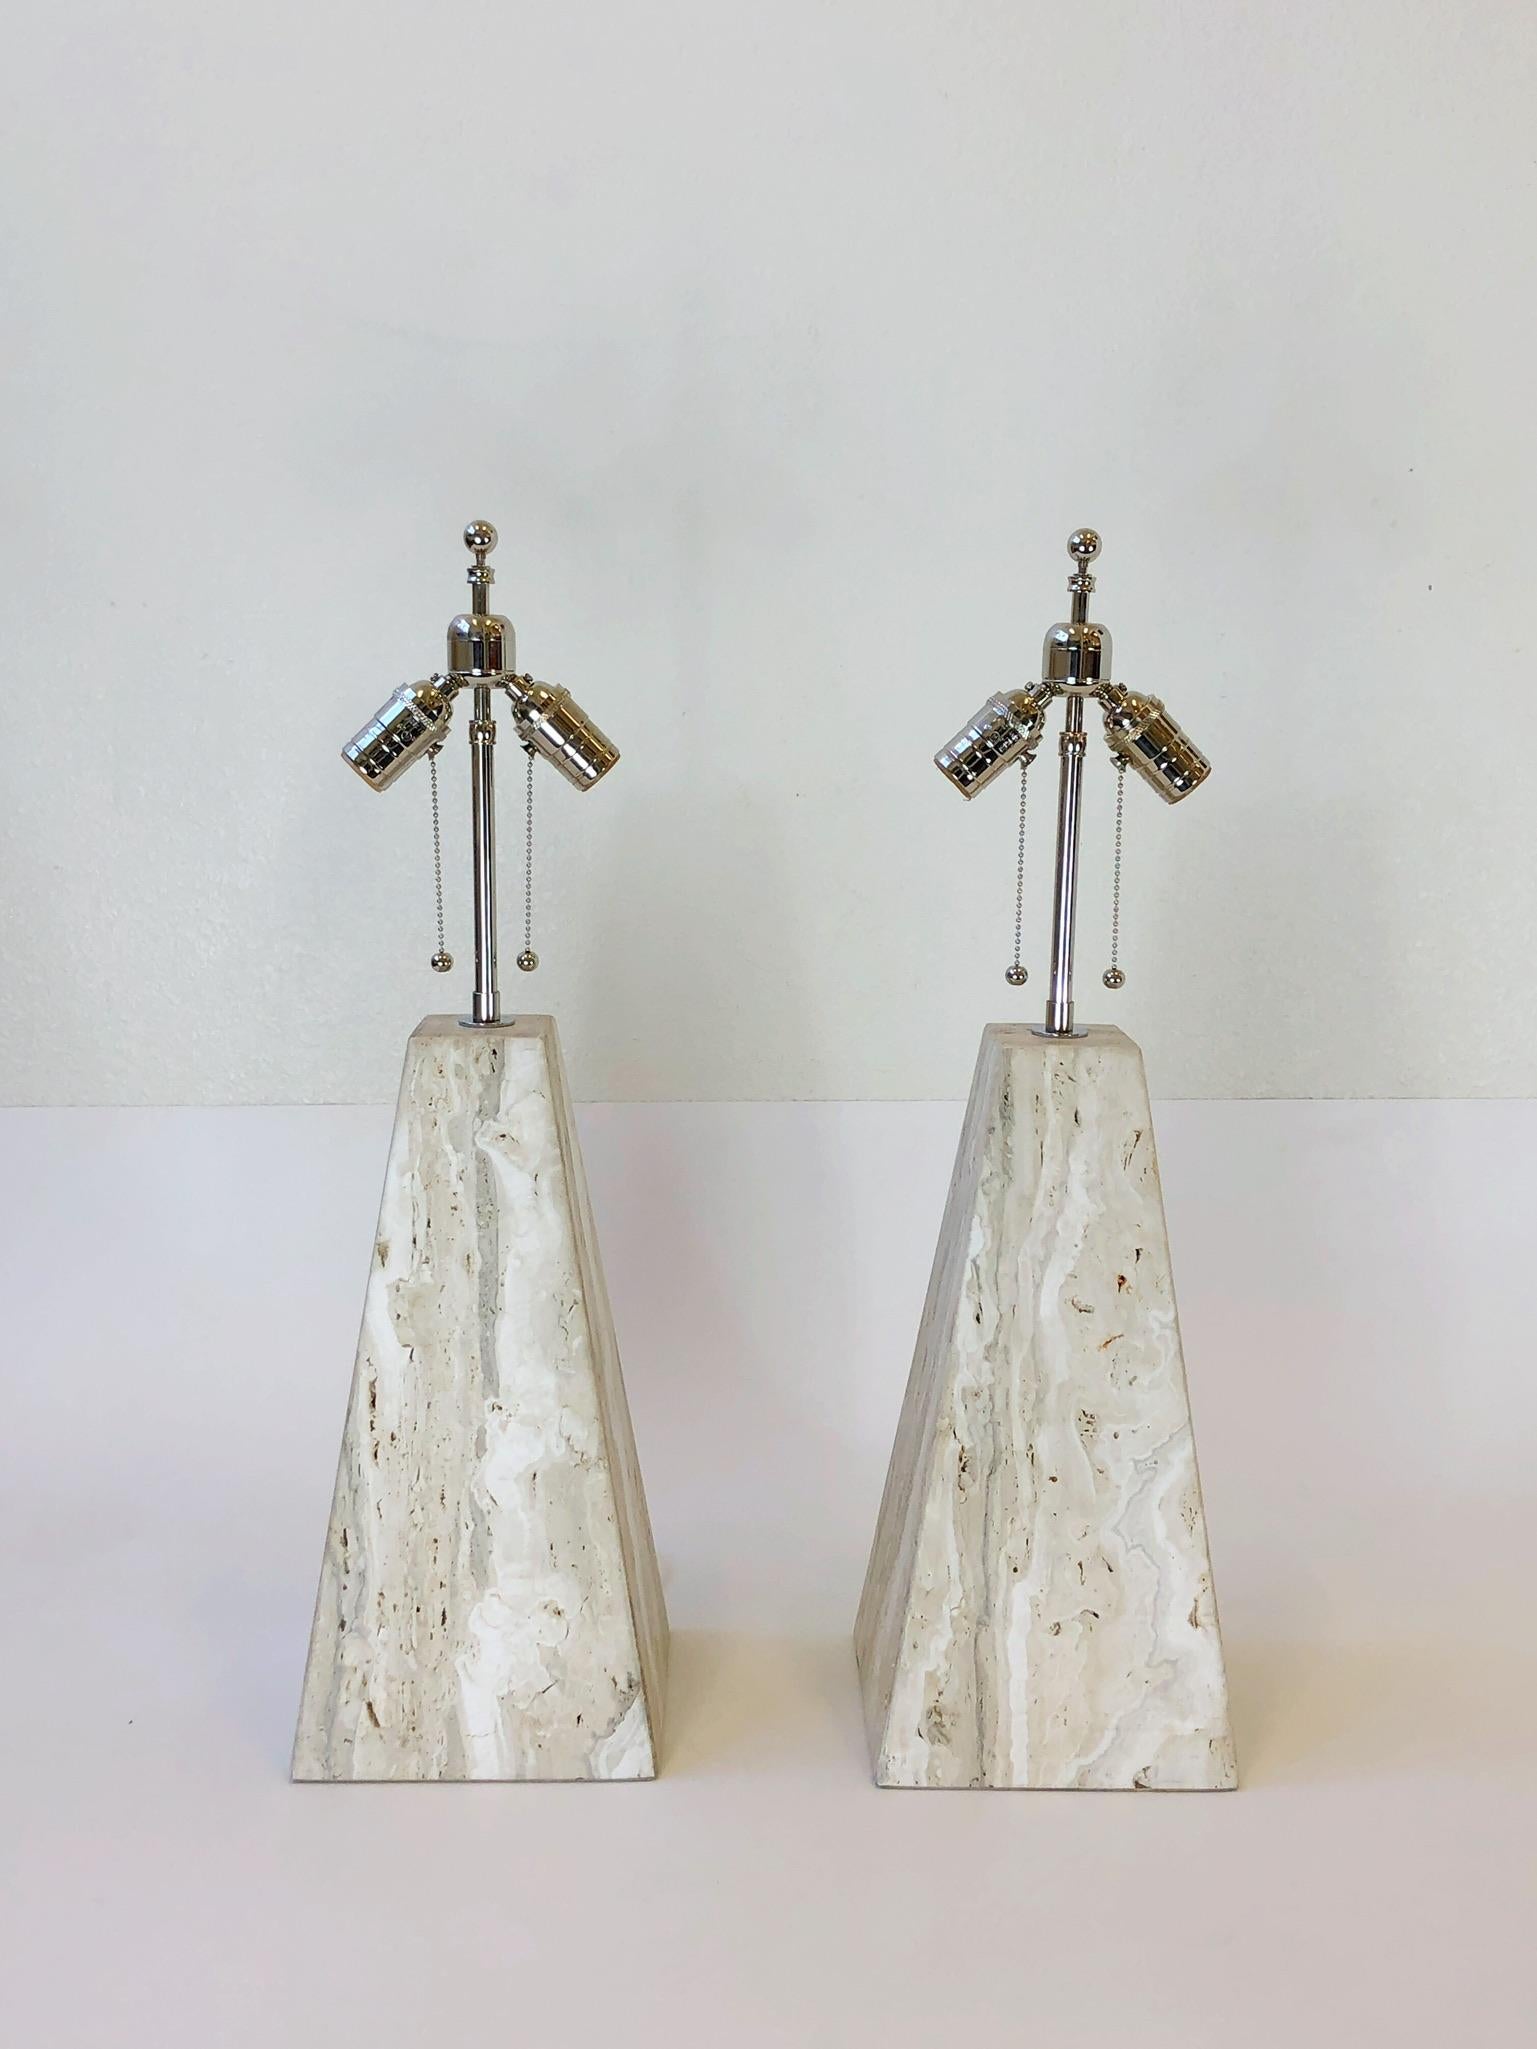 Pair of Italian Travertine and Polish Nickel Obelisk Shape Table Lamps  For Sale 6